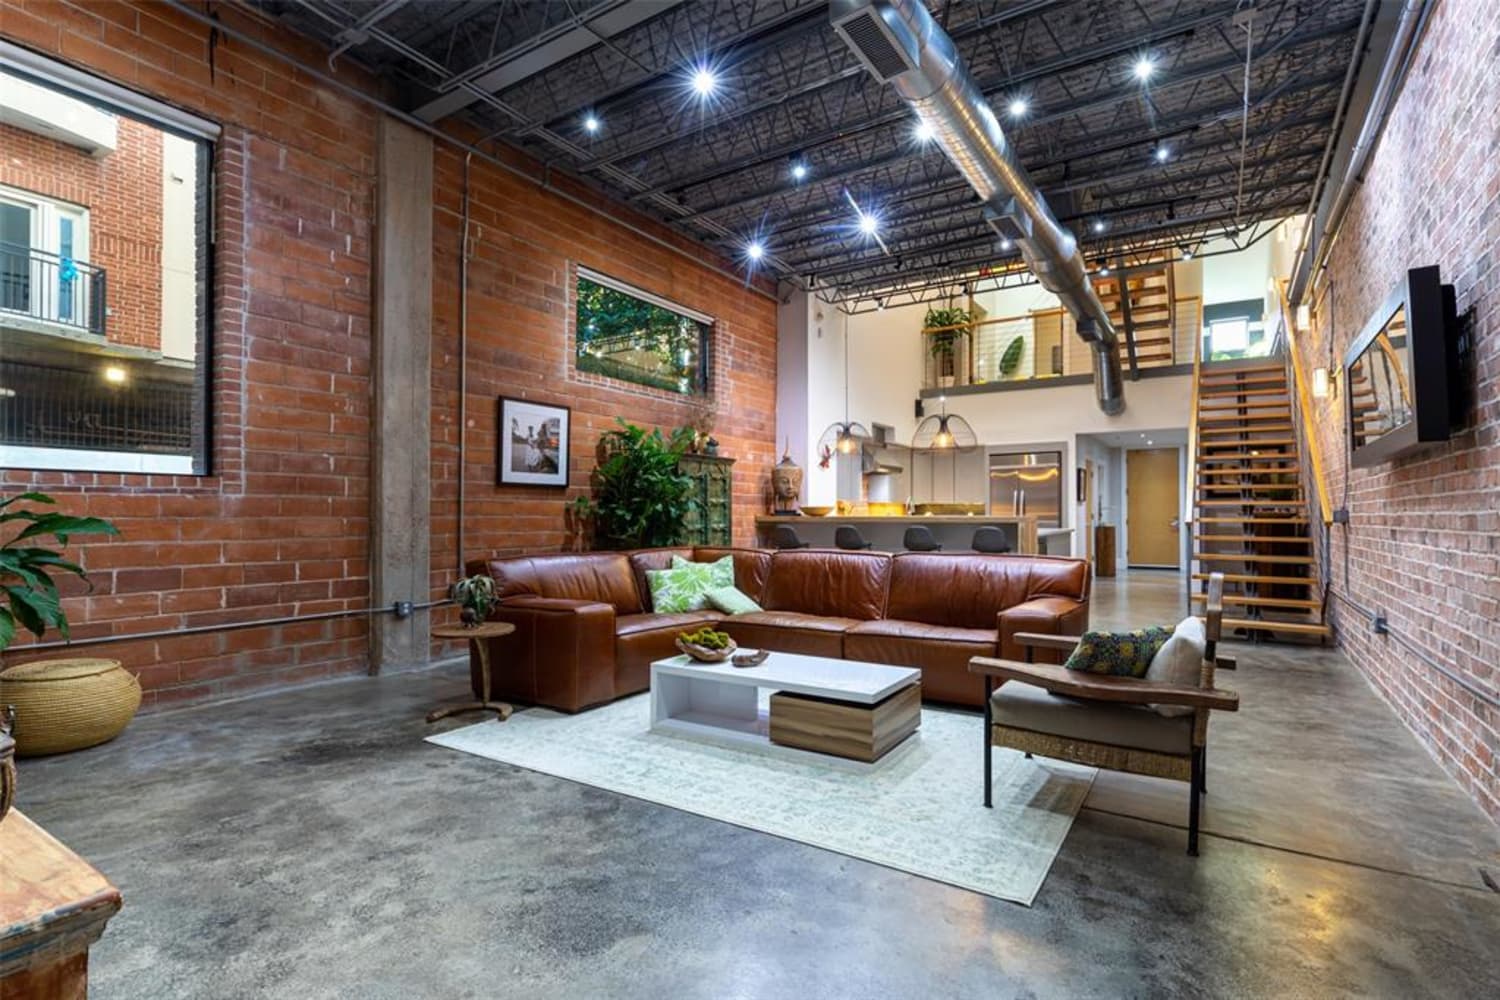 Texas Lofts for Sale — 1717 W Webster Street, Houston | Apartment Therapy